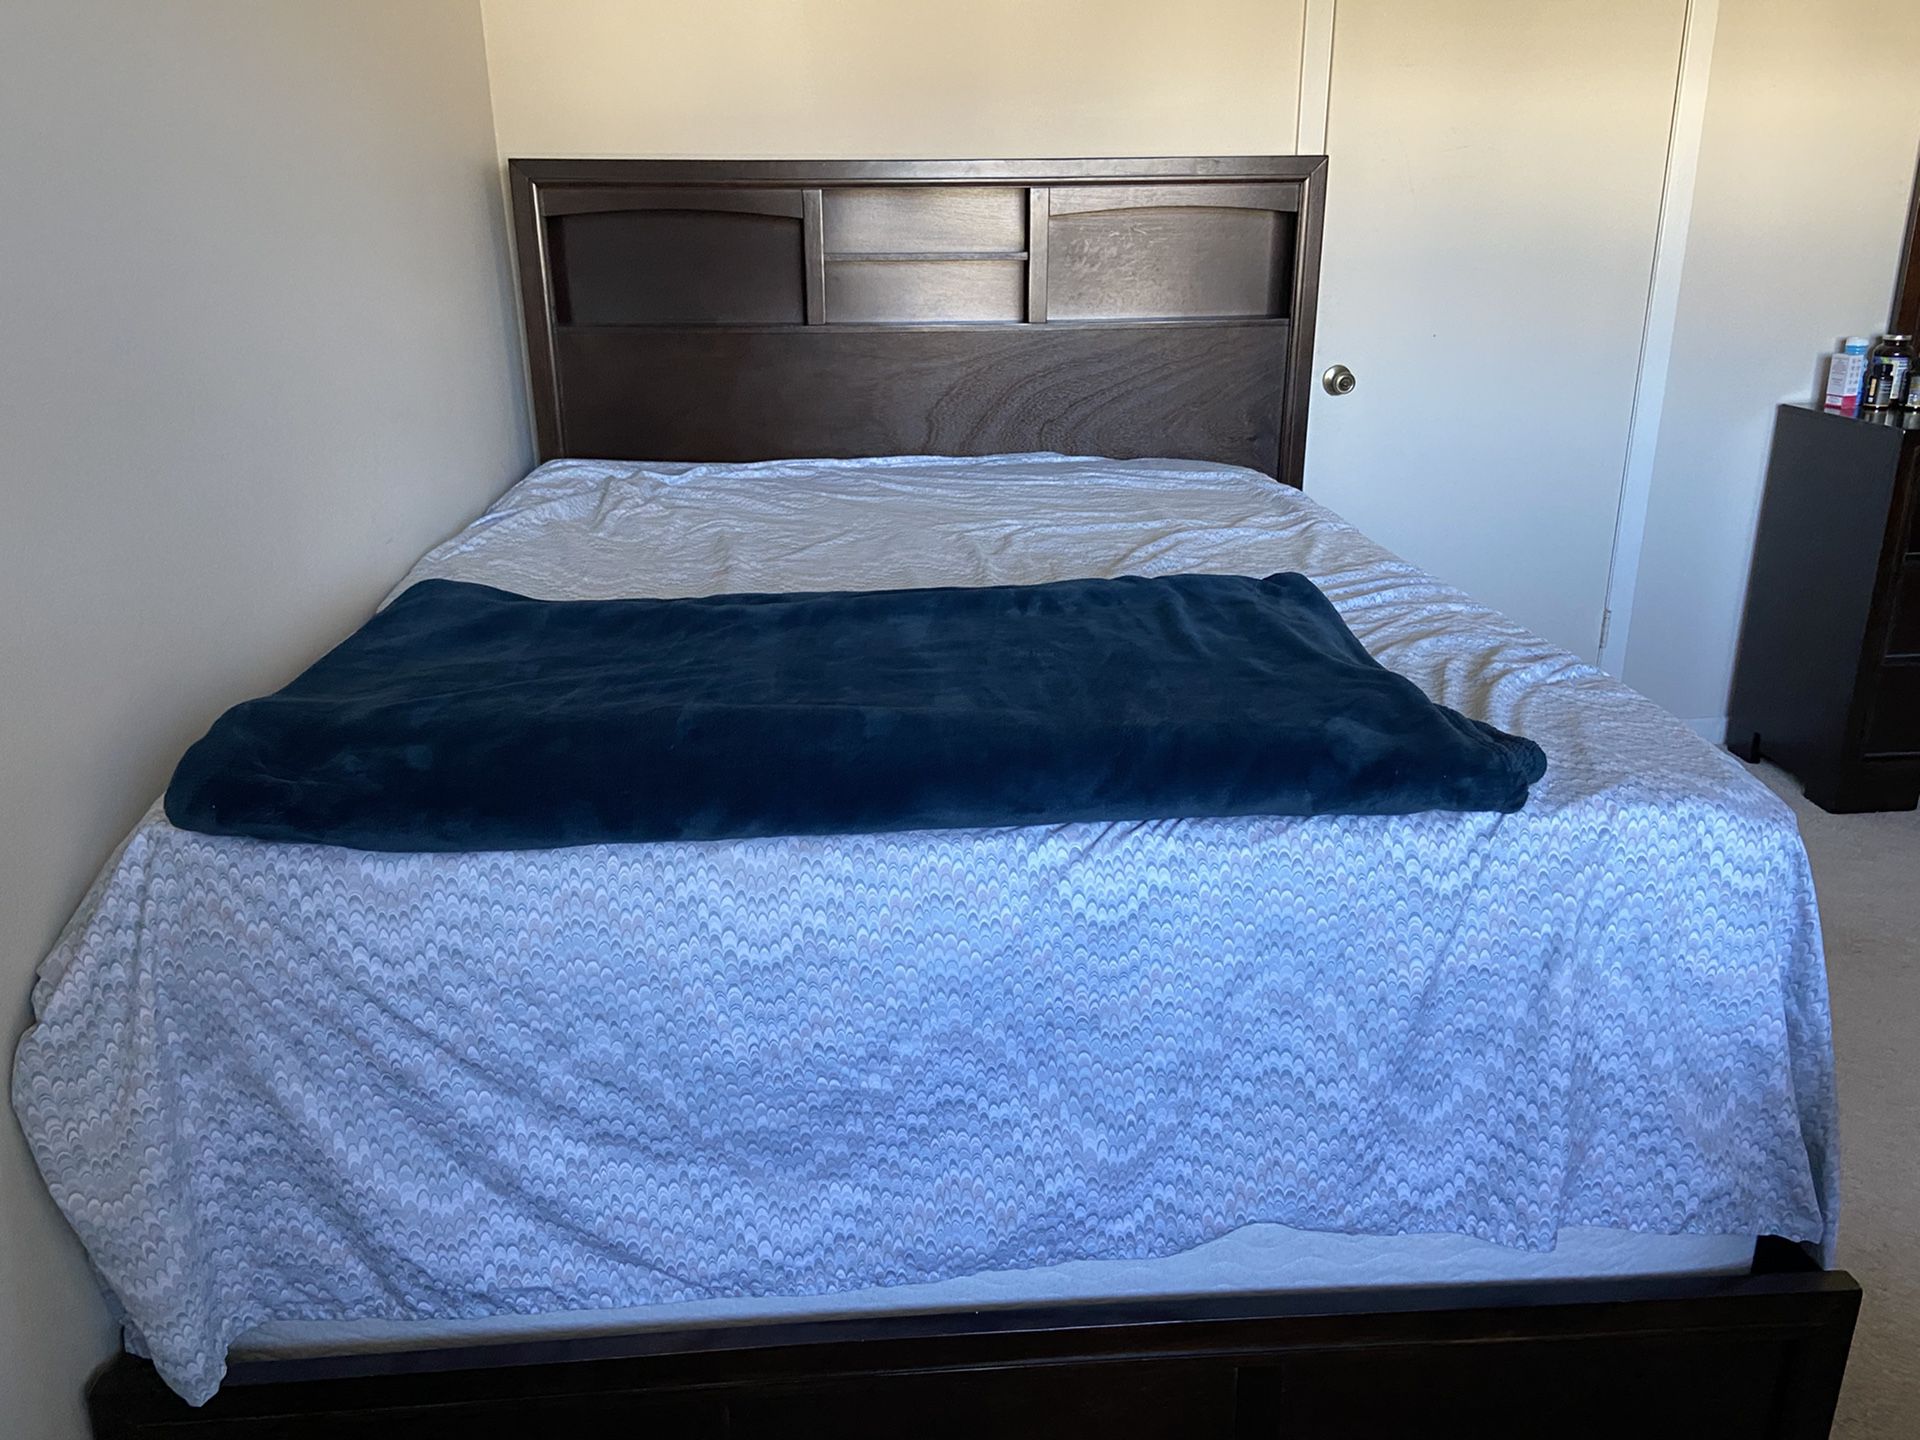 Rarely used wooden queen size bed frame!!